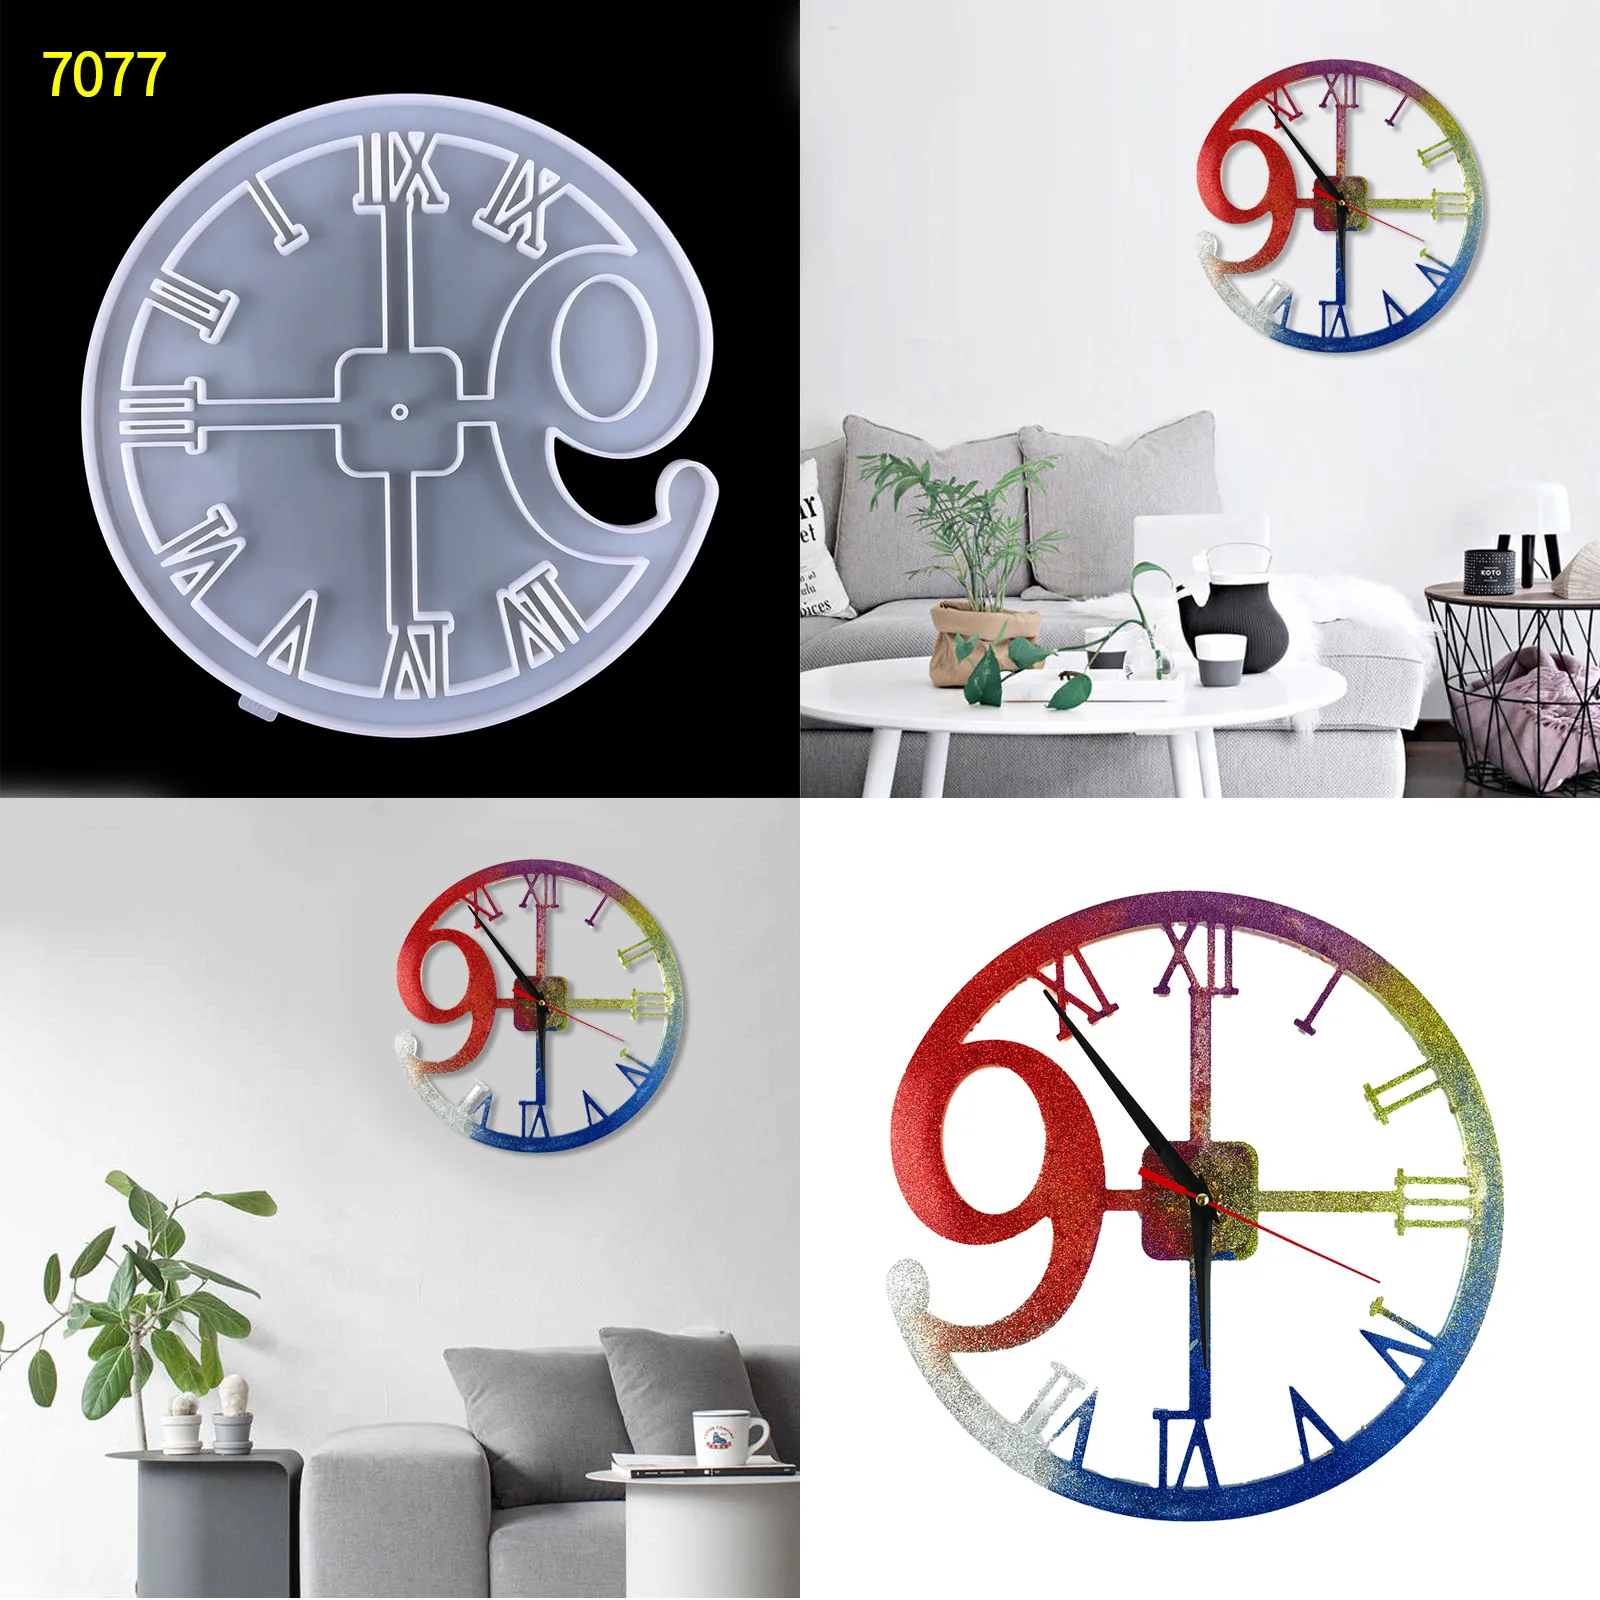 Clock Wall Hanging Silicone Mold DIY Round Hollow Digital Clock Pendant Wall Decoration Clock Silicone Mould For Resin Making diy art clock epoxy resin silicone mold cat paws wall clock hanging decoration home ornaments craft jewelry mould